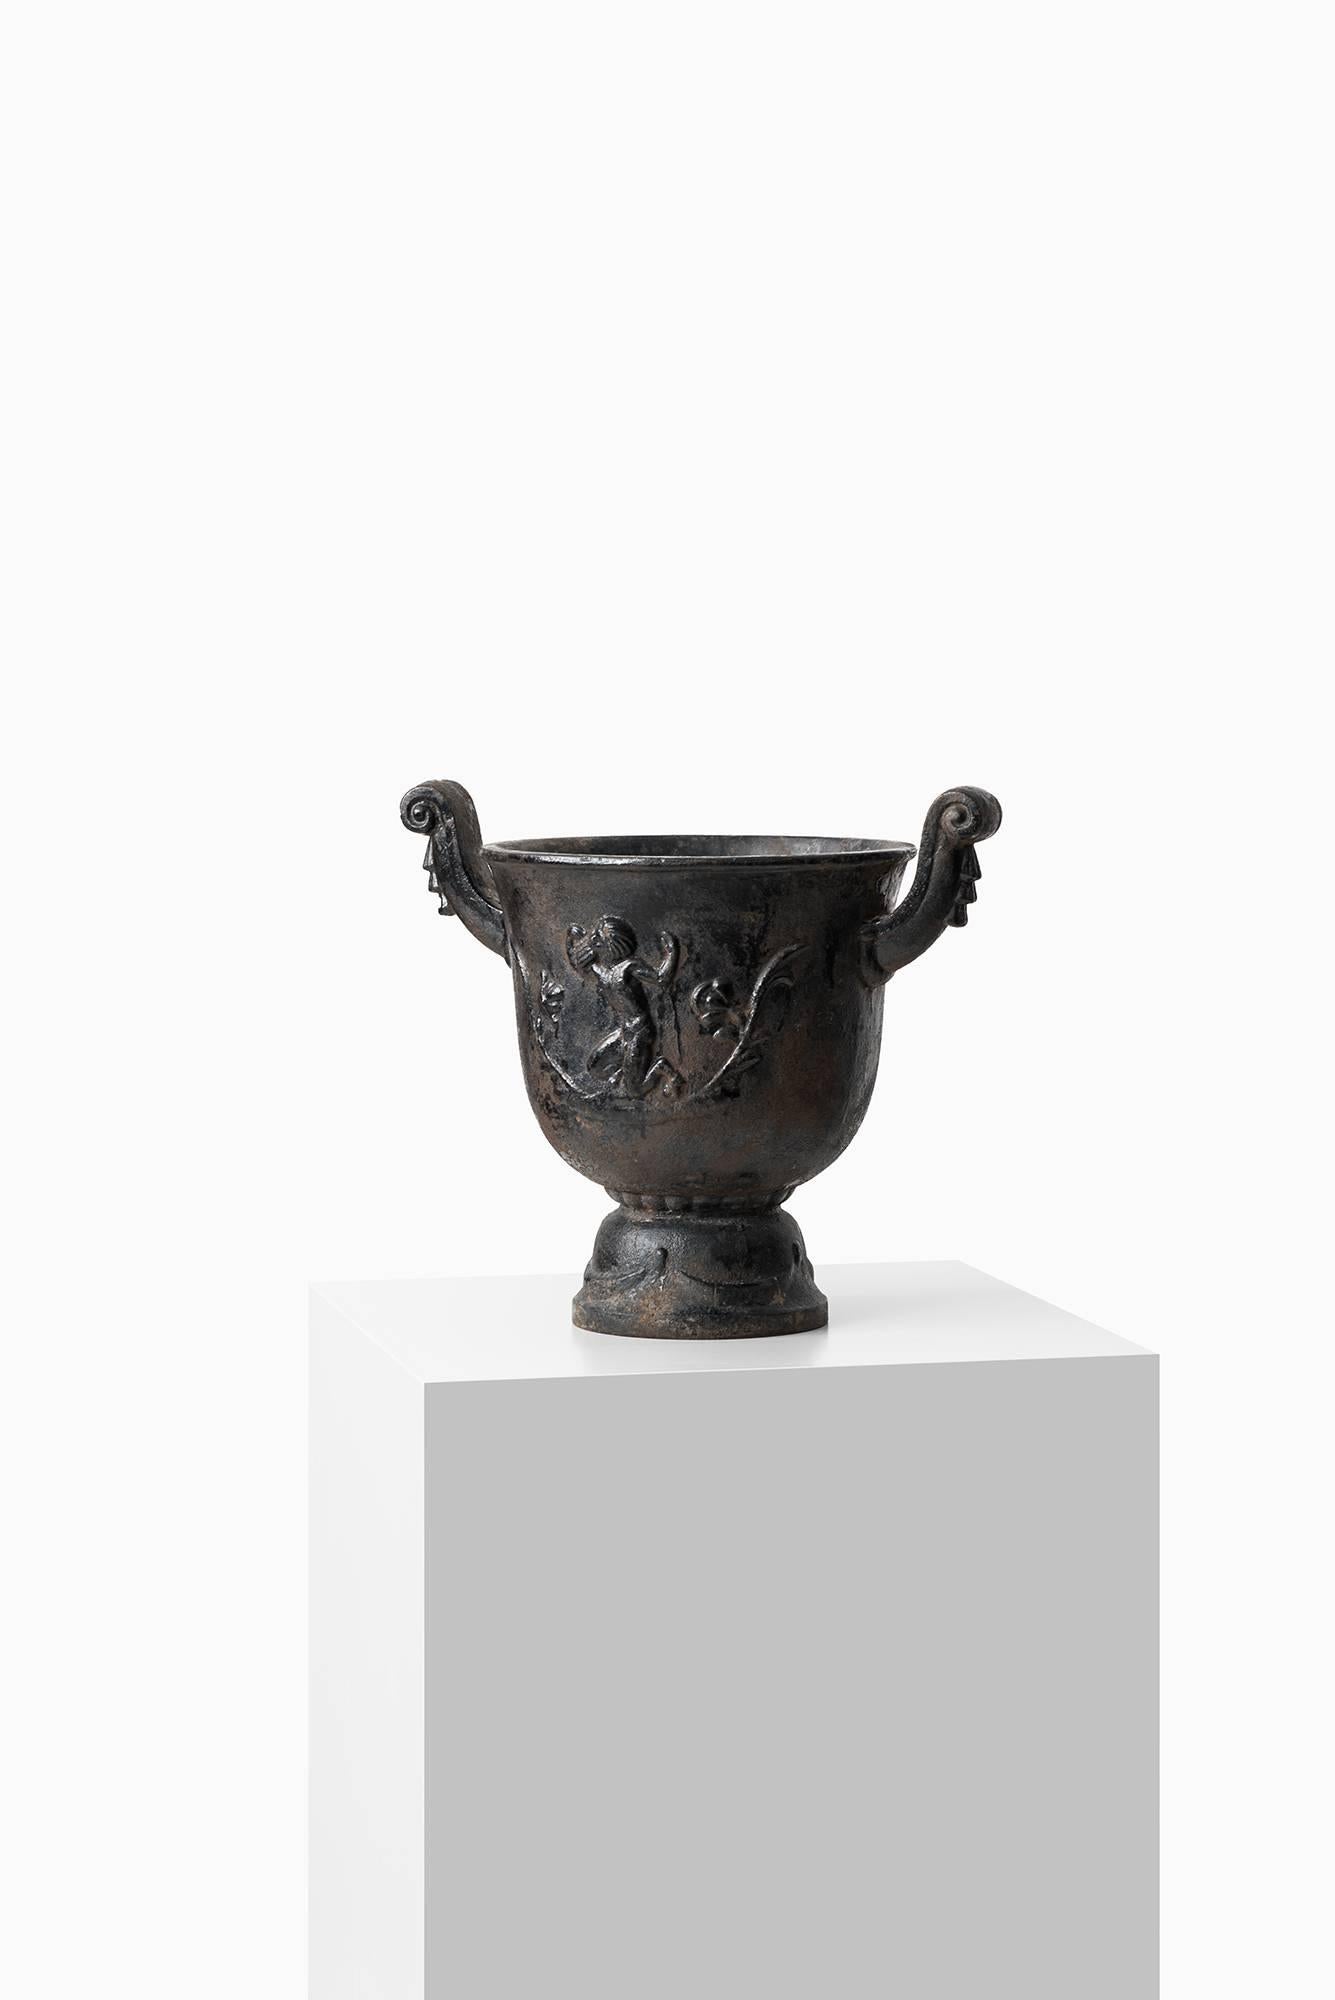 Early 20th Century Ivar Johnsson Faun Urn / Planter by Näfveqvarns Bruk in Sweden For Sale